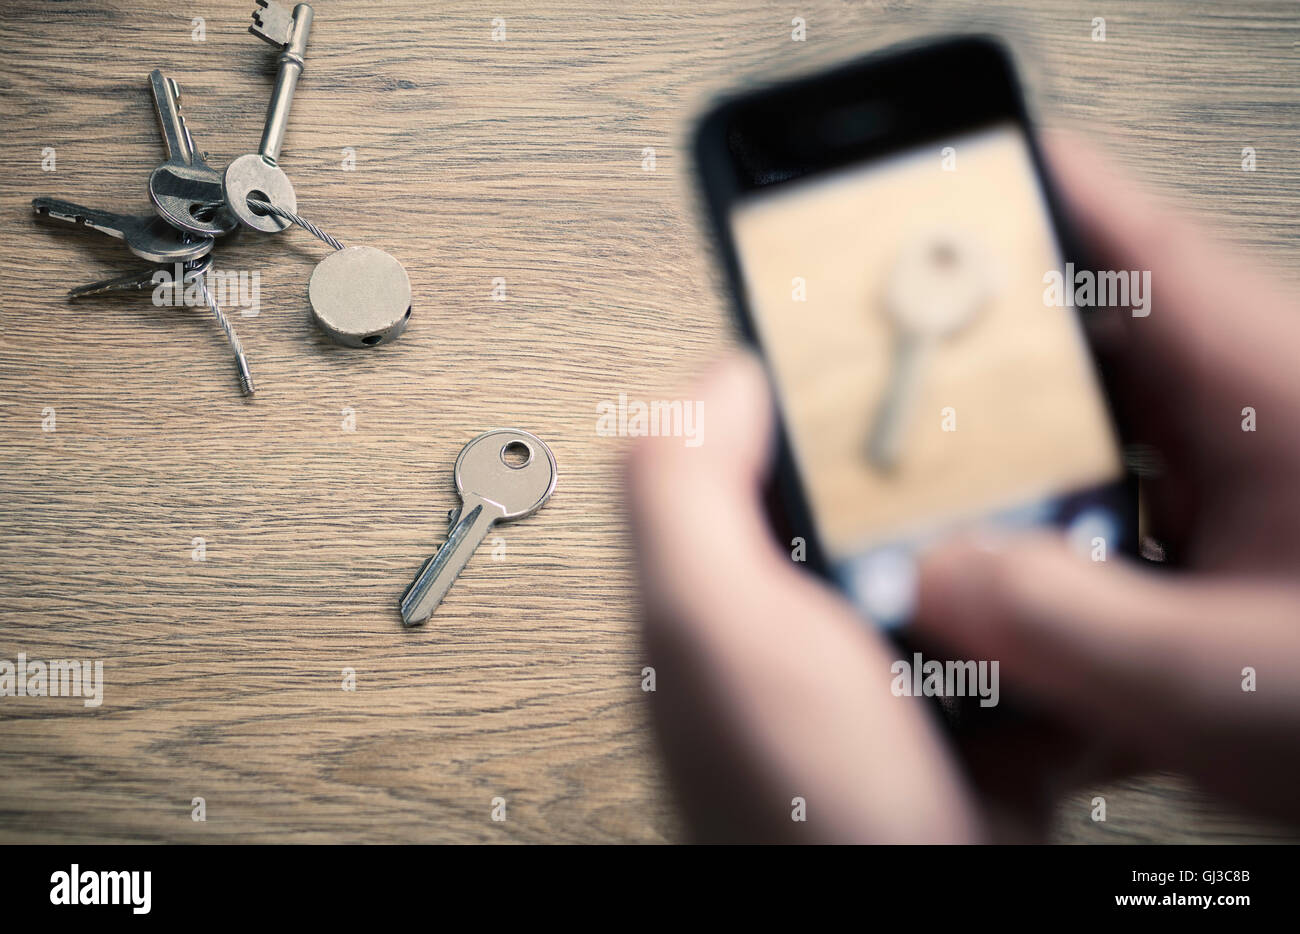 Man's hands taking photograph with smartphone of bunch of keys Stock Photo